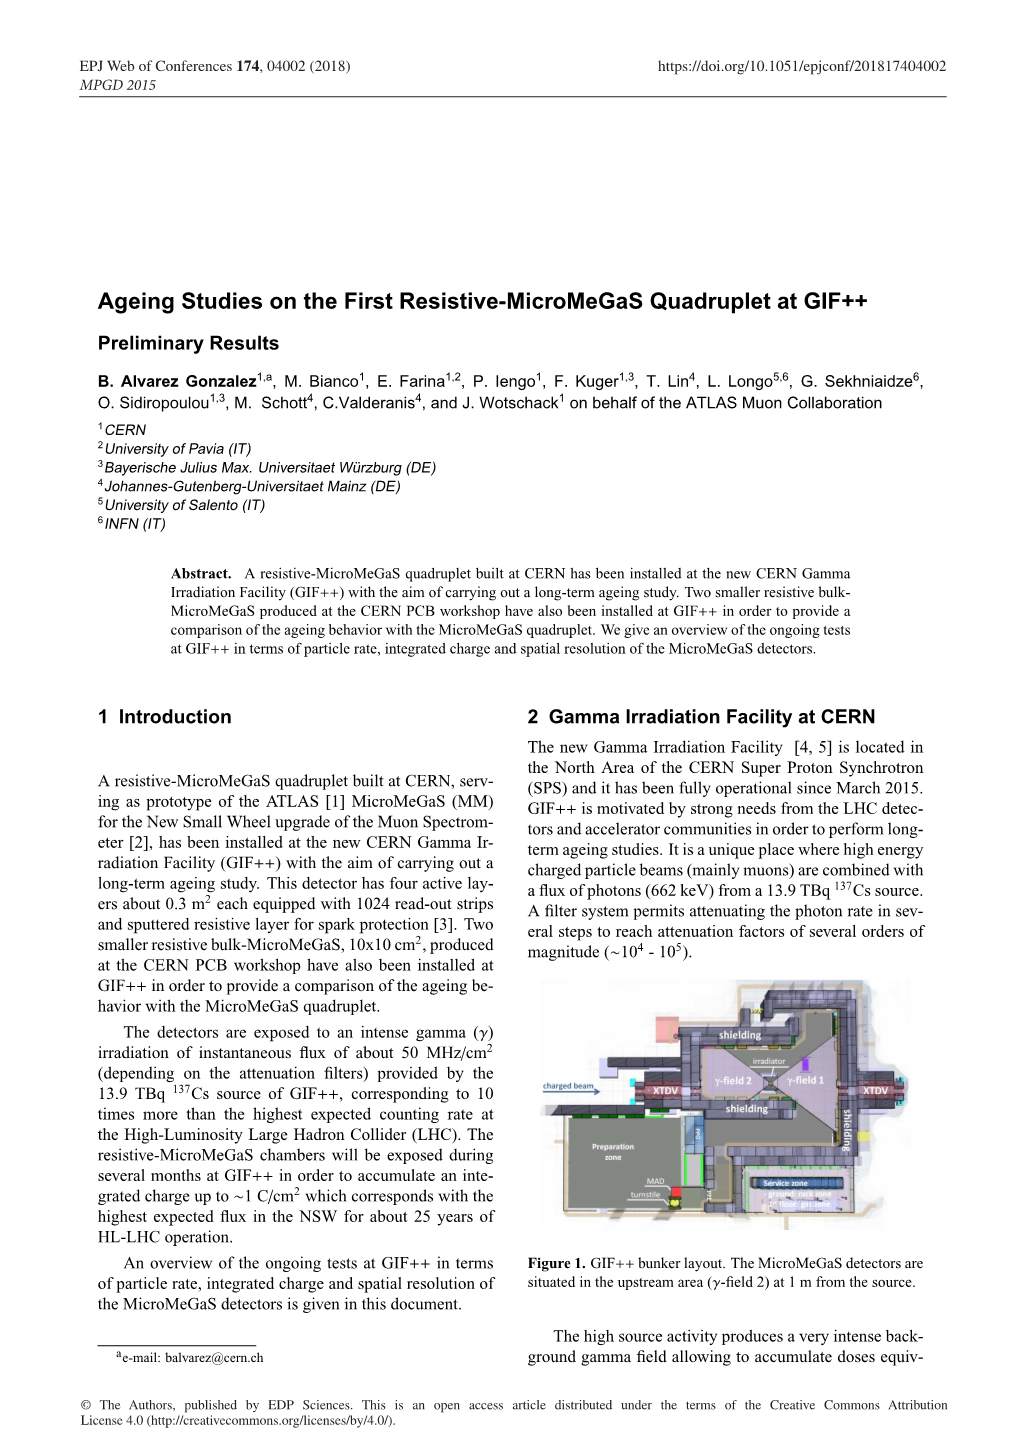 Ageing Studies on the First Resistive-Micromegas Quadruplet at GIF++